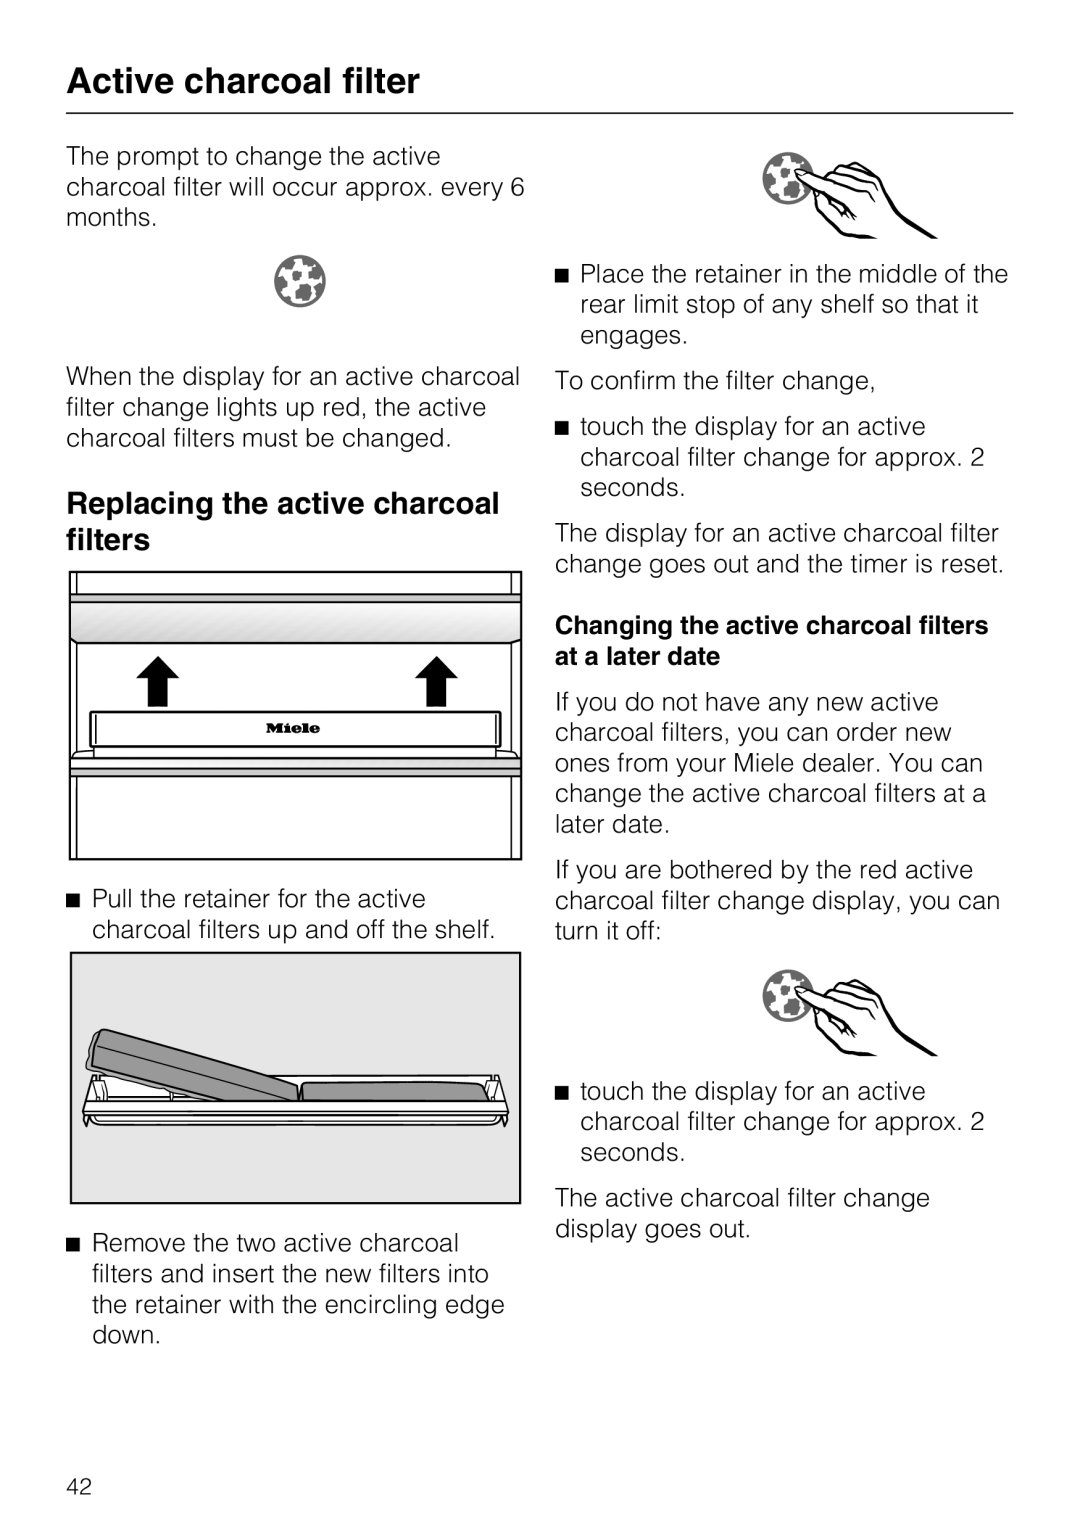 Miele KFN 14943 SDE ED installation instructions Active charcoal filter, Replacing the active charcoal filters 